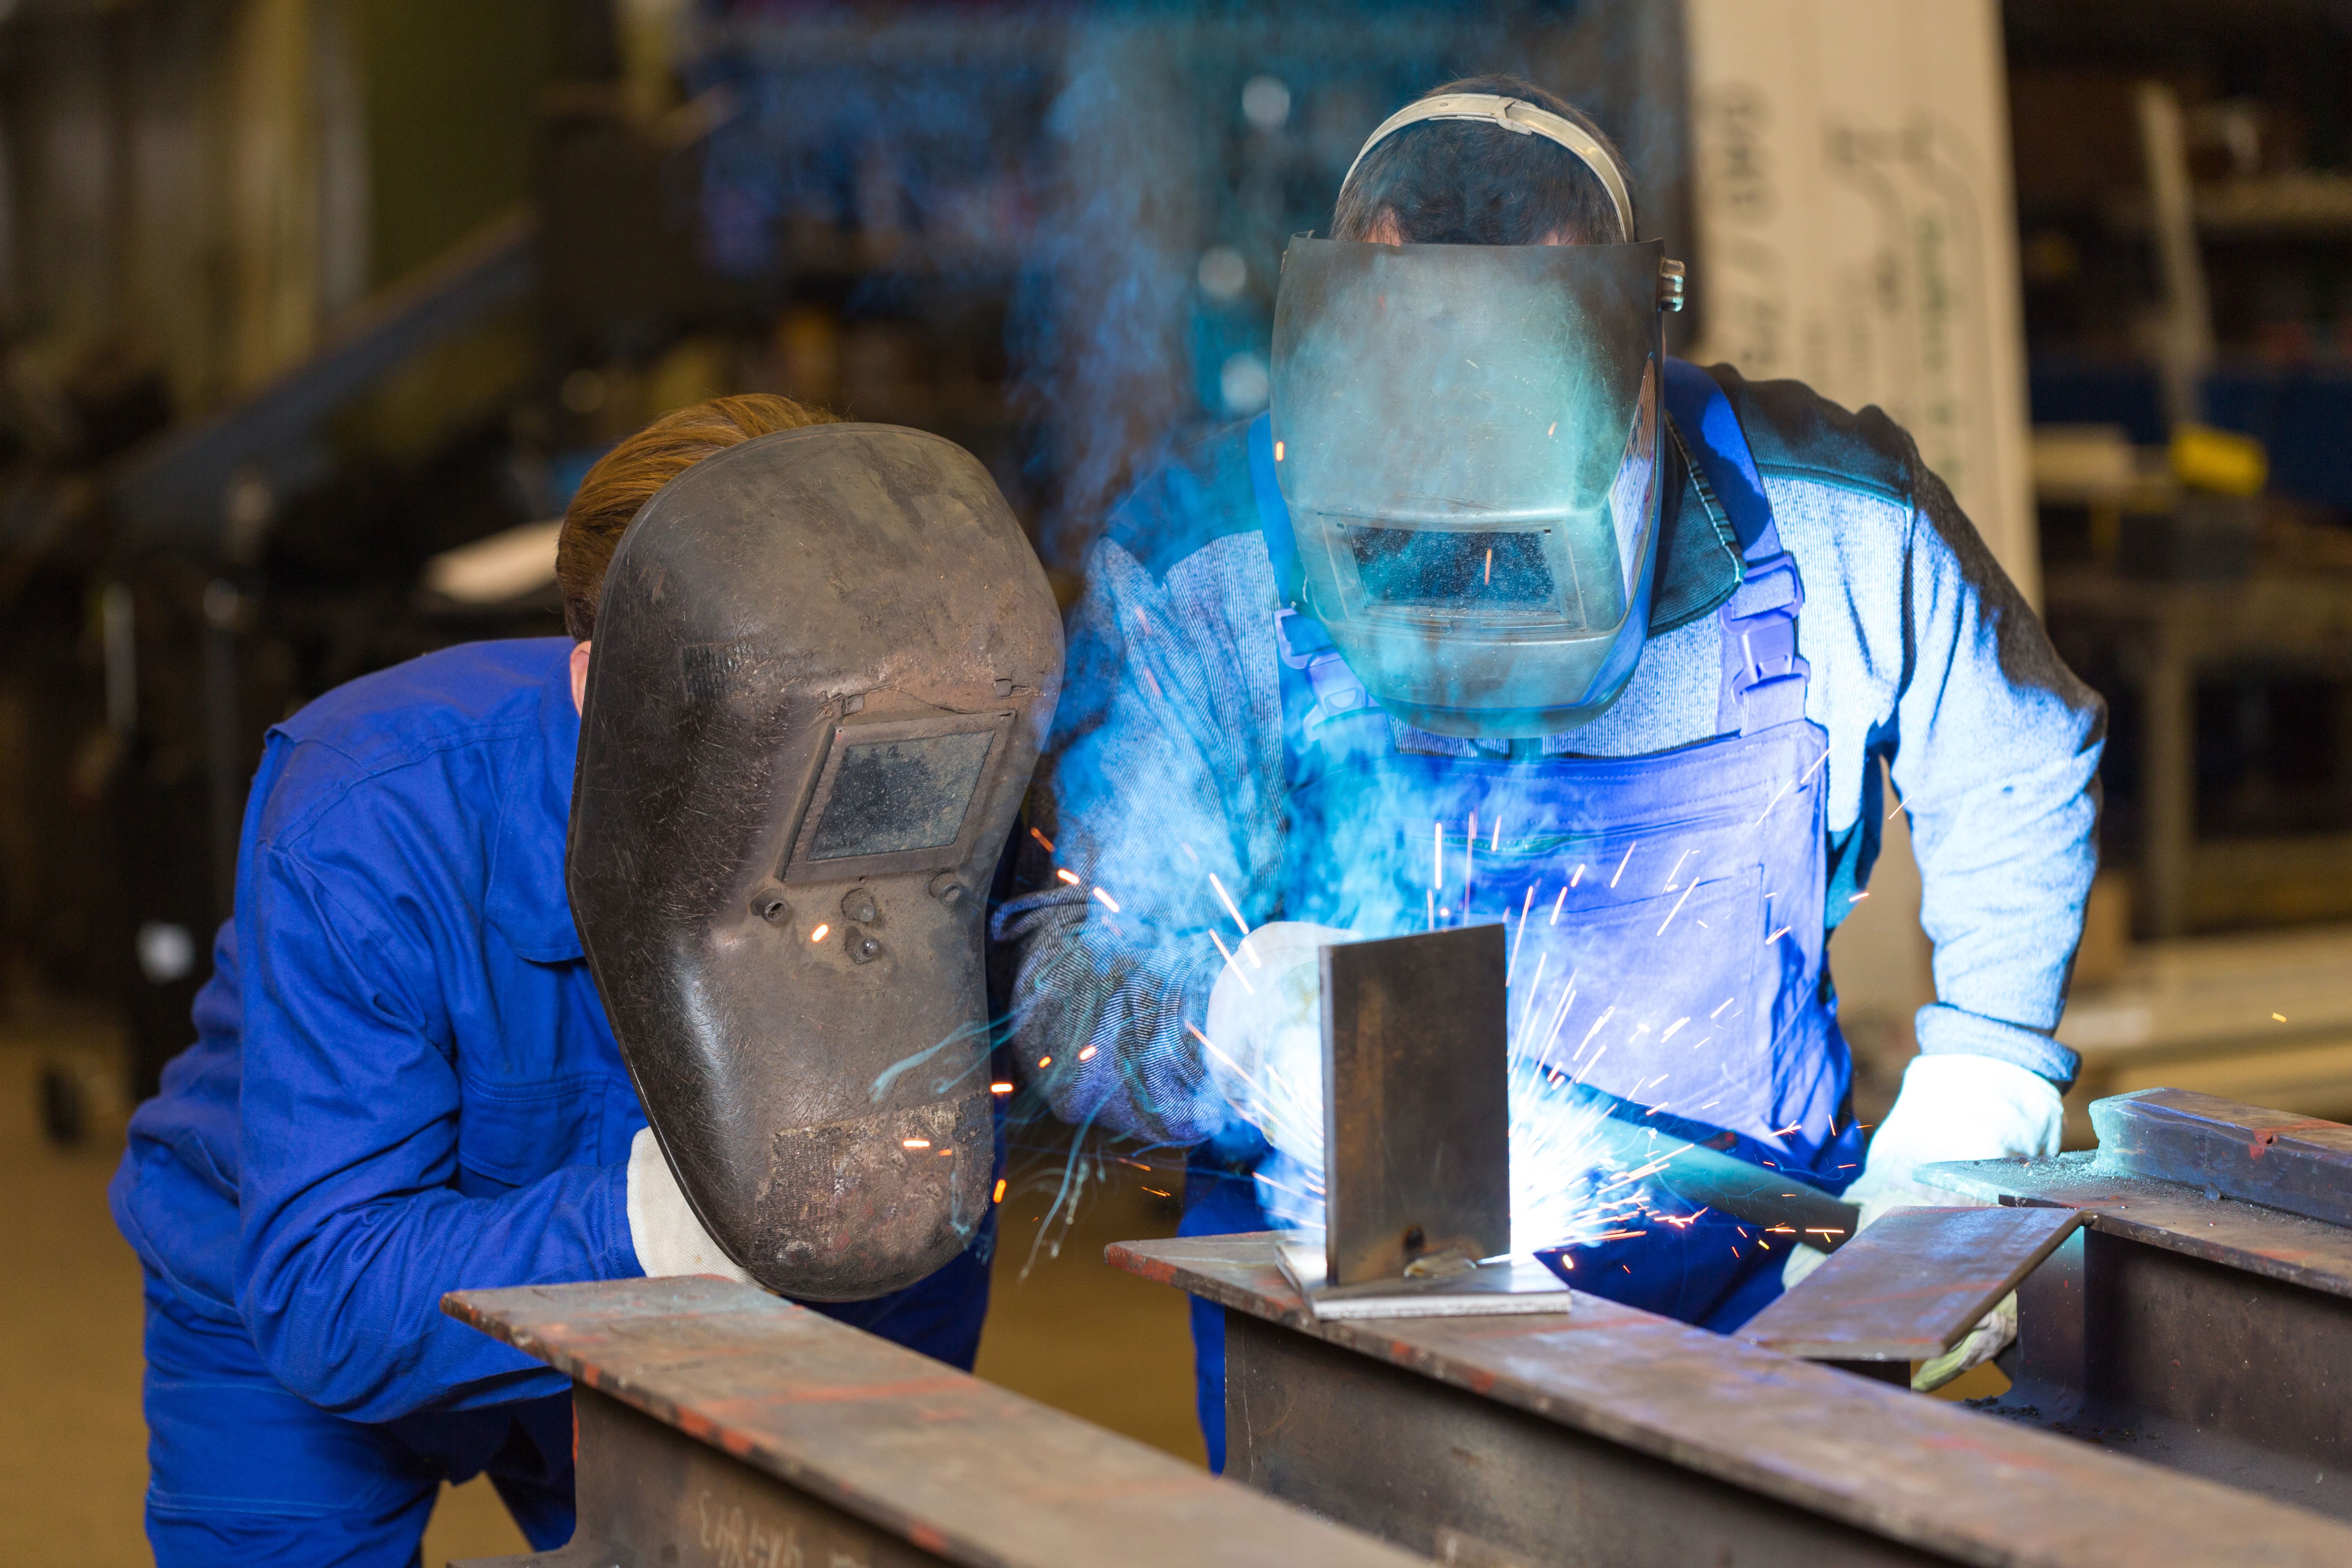 Two welders wearing masks work together